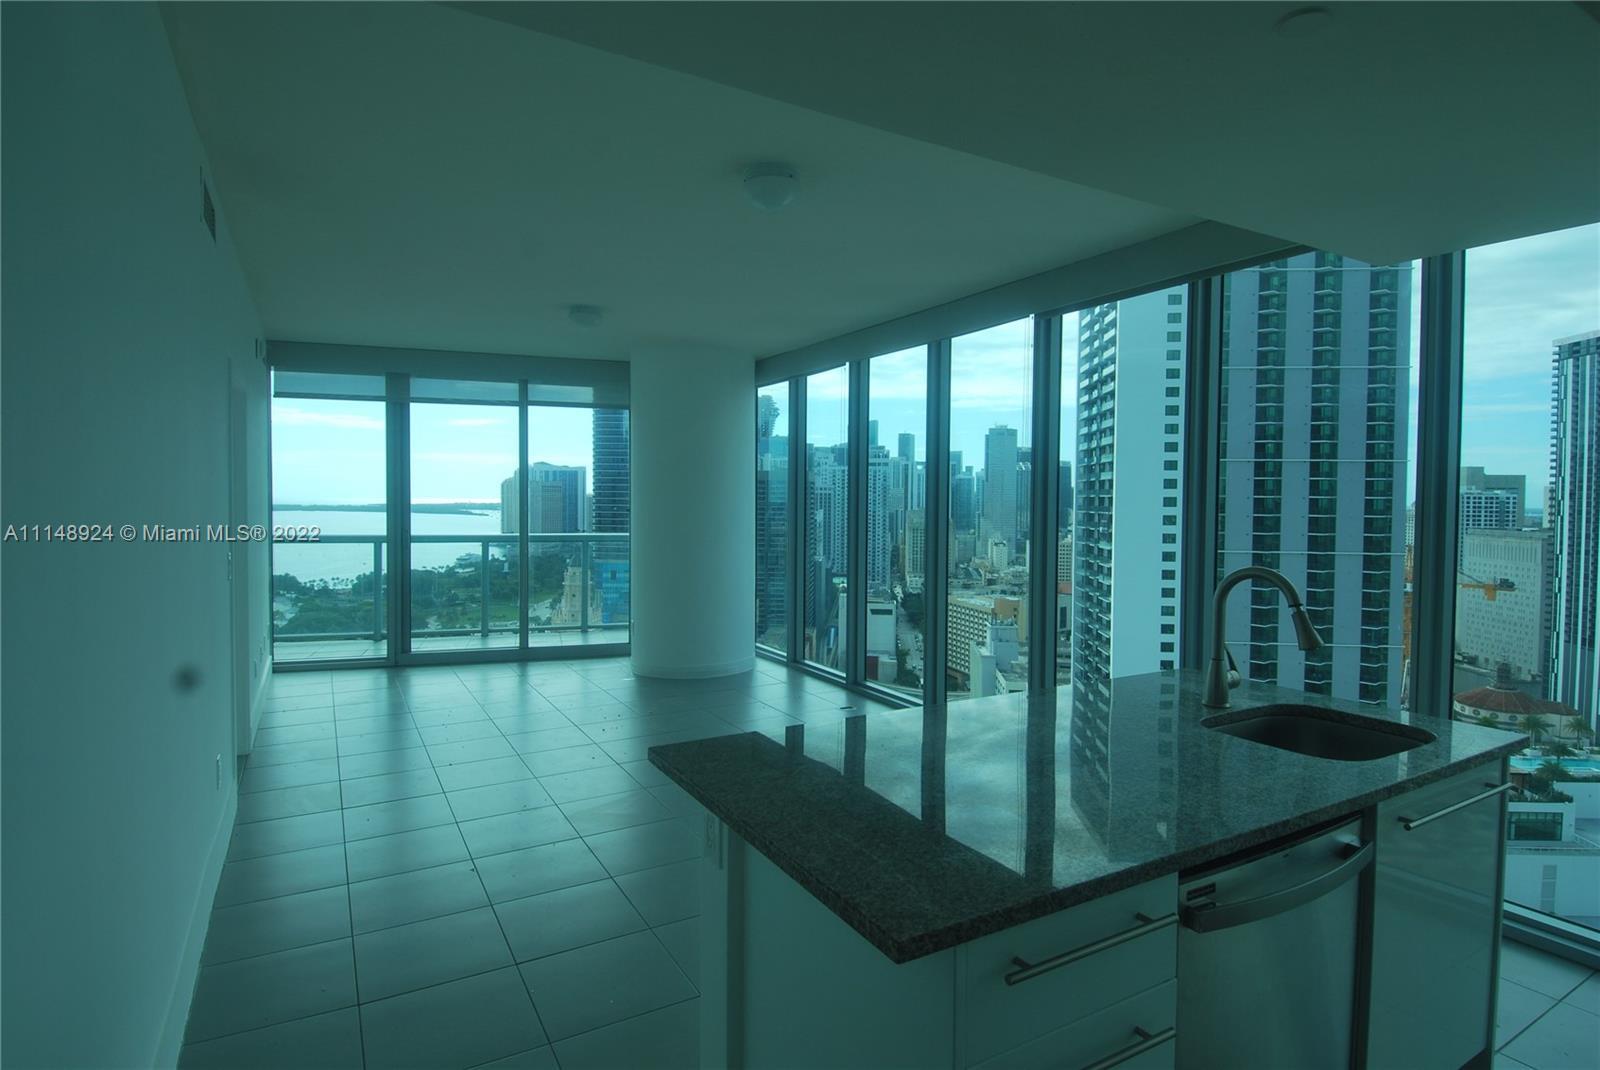 Spectacular 2/2 corner unit on the 30th floor with breathtaking, panoramic views of Biscayne Bay, Oc